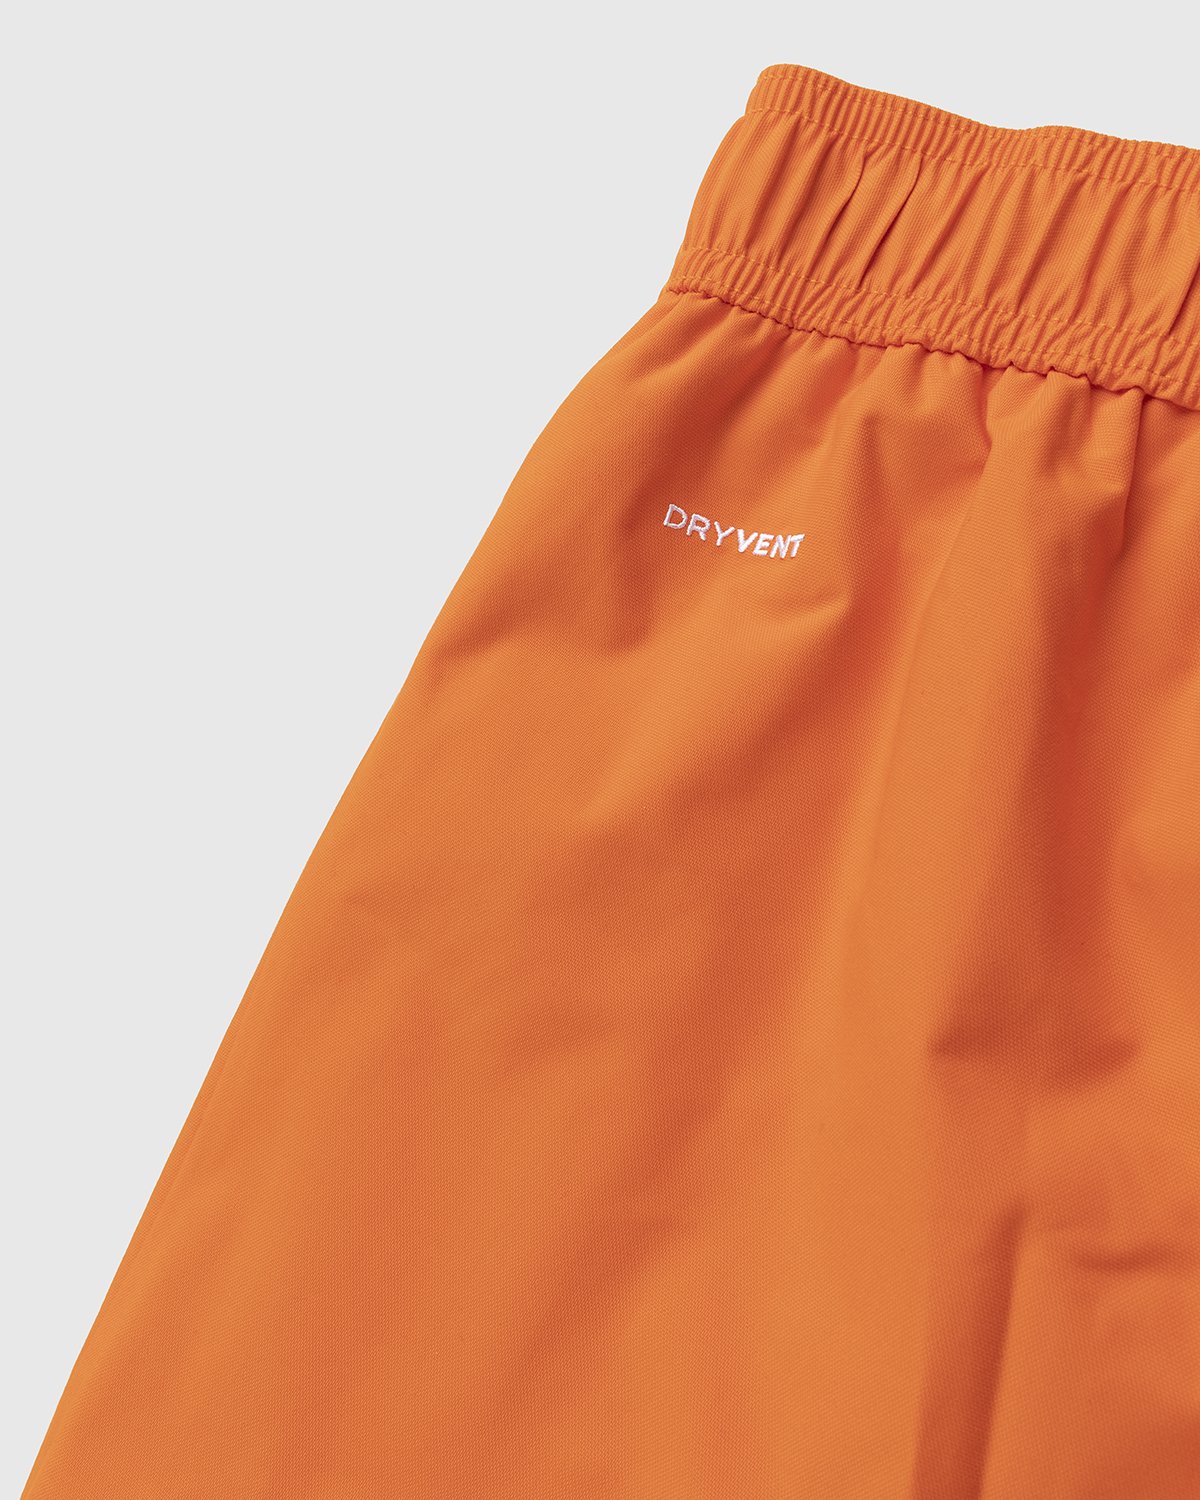 The North Face - Trans Antarctica Expedition Pant Red Orange - Clothing - Orange - Image 3